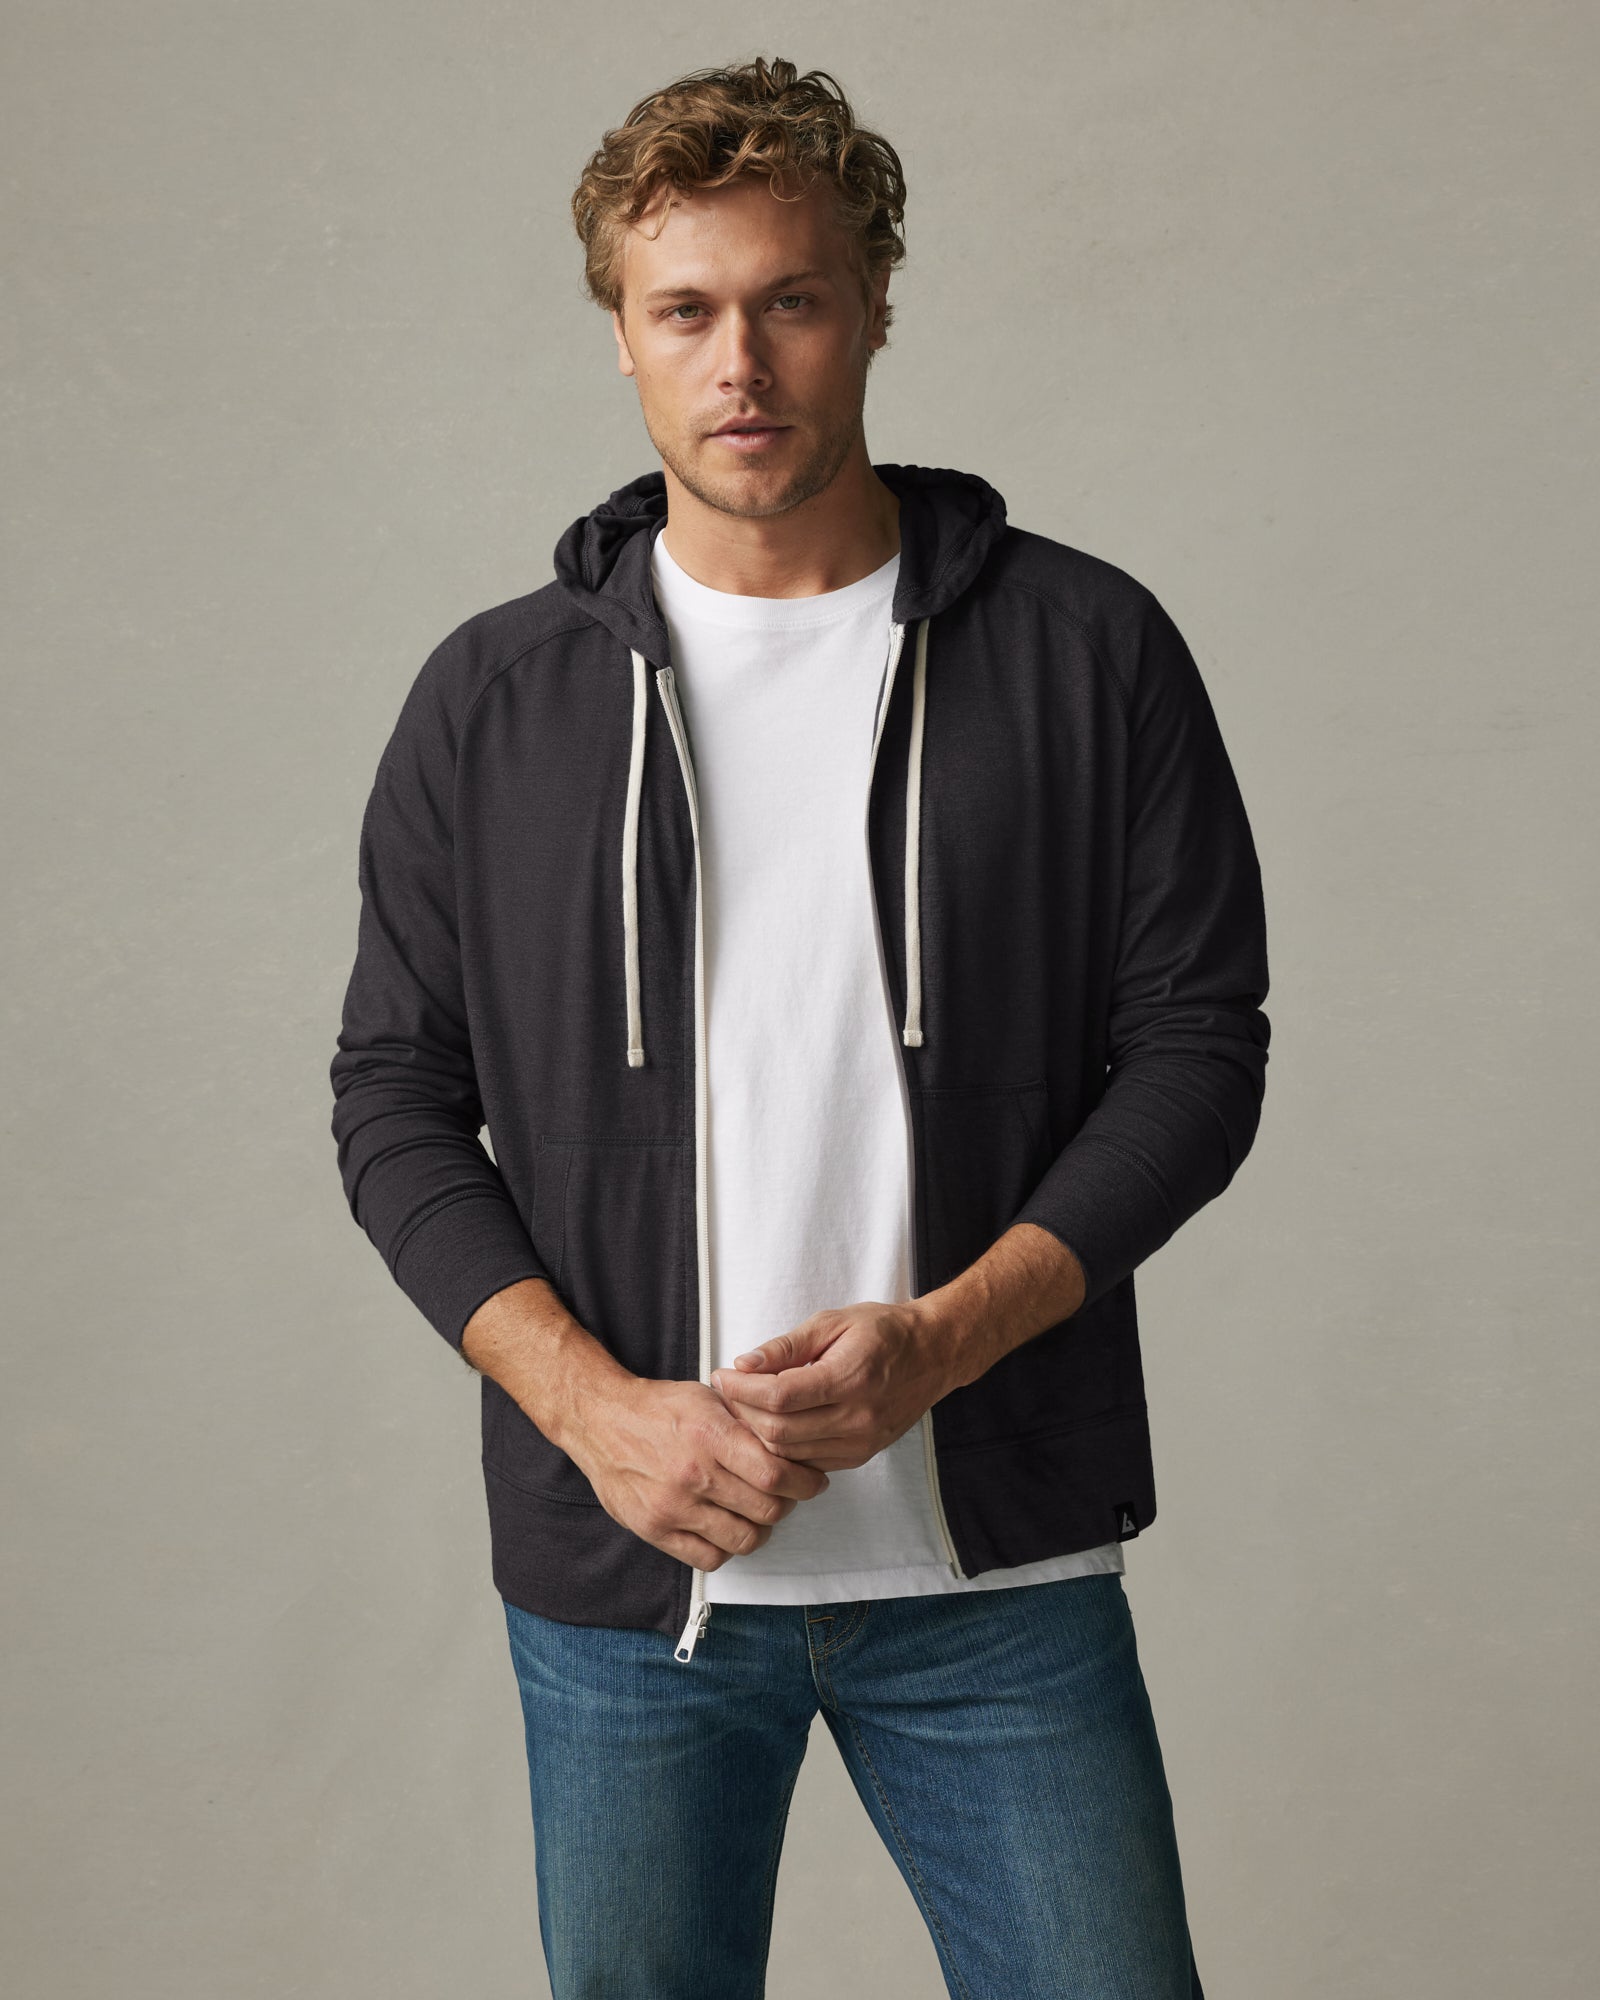 S Lightweight Full Zip - Black Solid by American Giant - Made in The USA